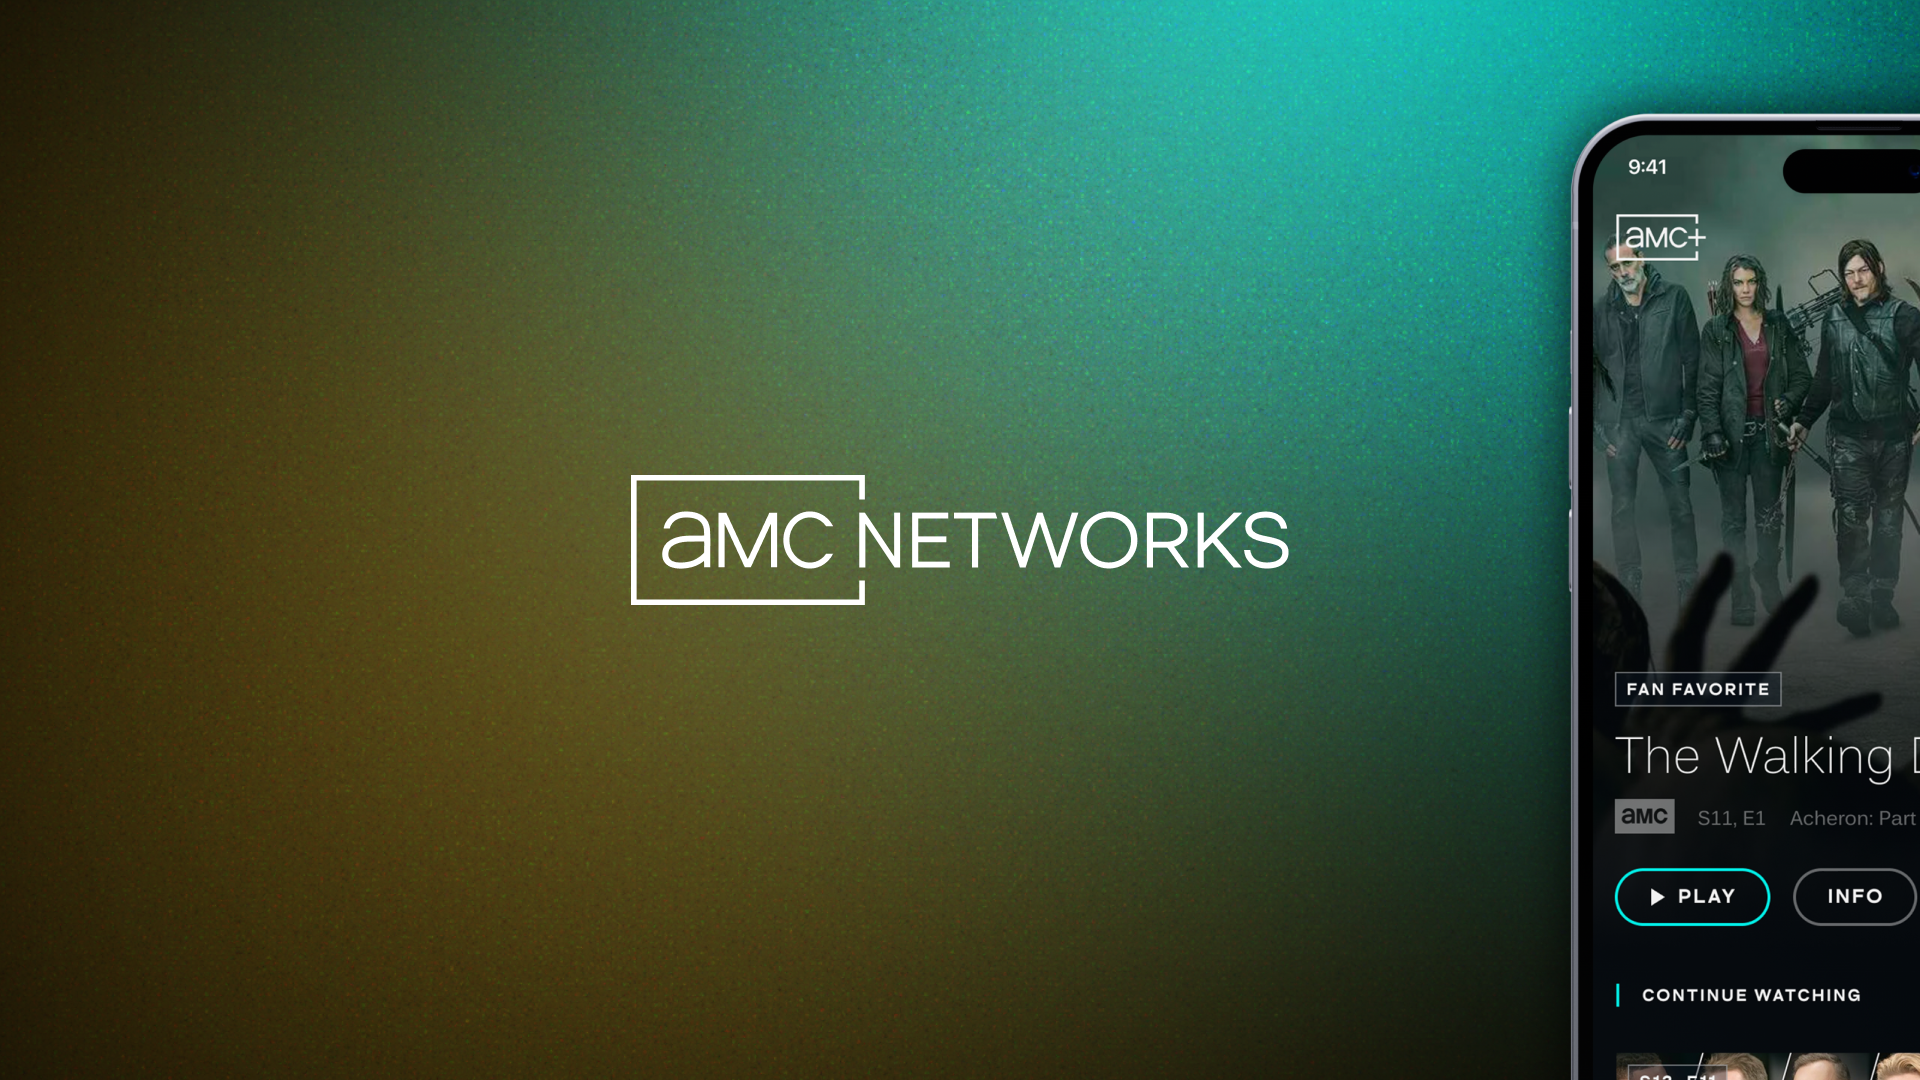 AMC Networks - Overview